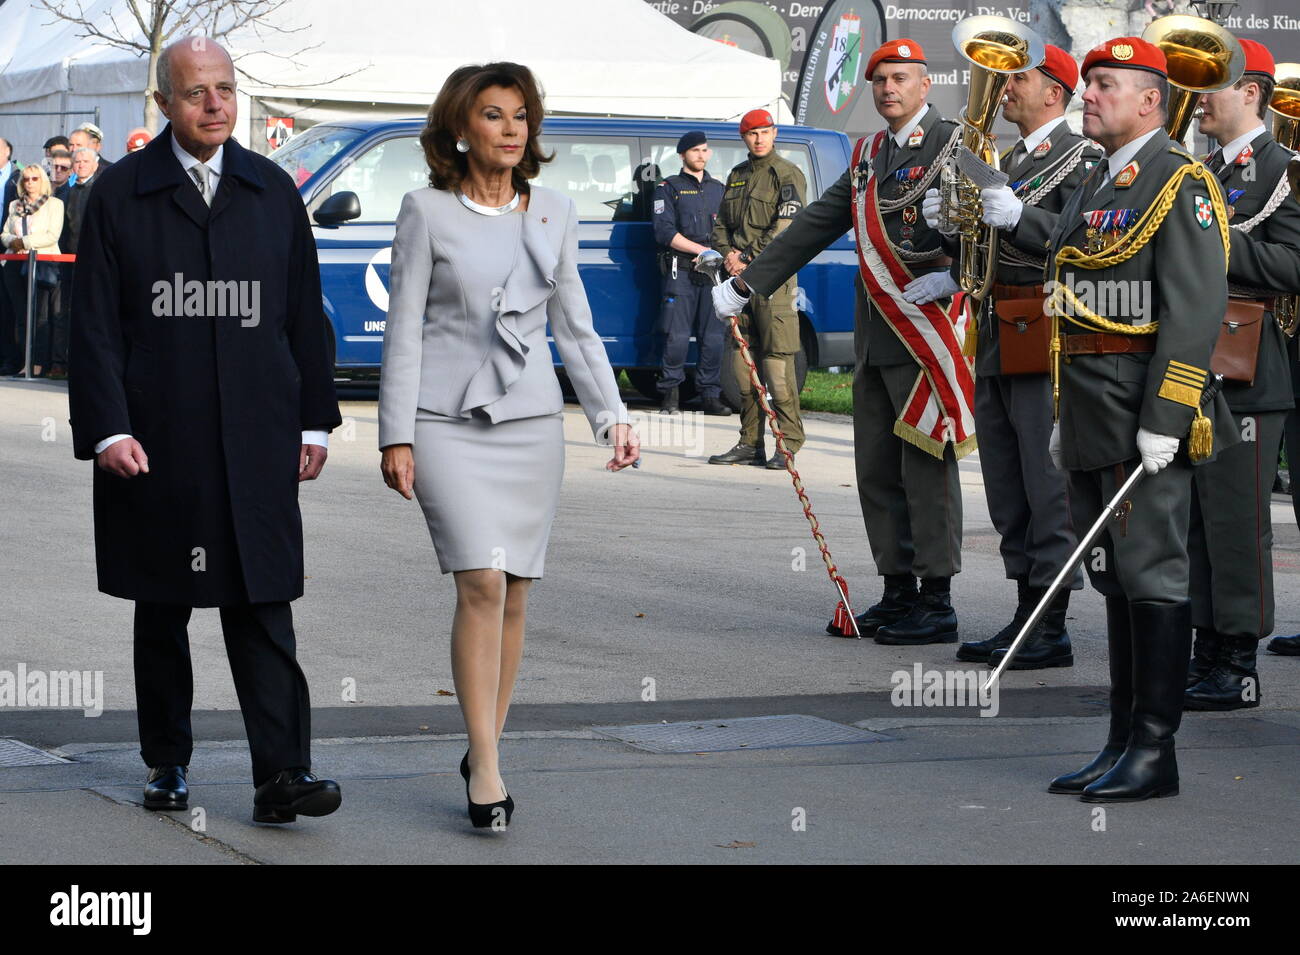 Vienna, Austria. 26th October, 2019. Austrian National Day on Heldenplatz (hero's place) with (L) Clemens Jabloner Vice Chancellor and (R) Federal Chancellor Brigitte Bierlein on October 26, 2019 in Vienna. Credit: Franz Perc / Alamy Live News Stock Photo